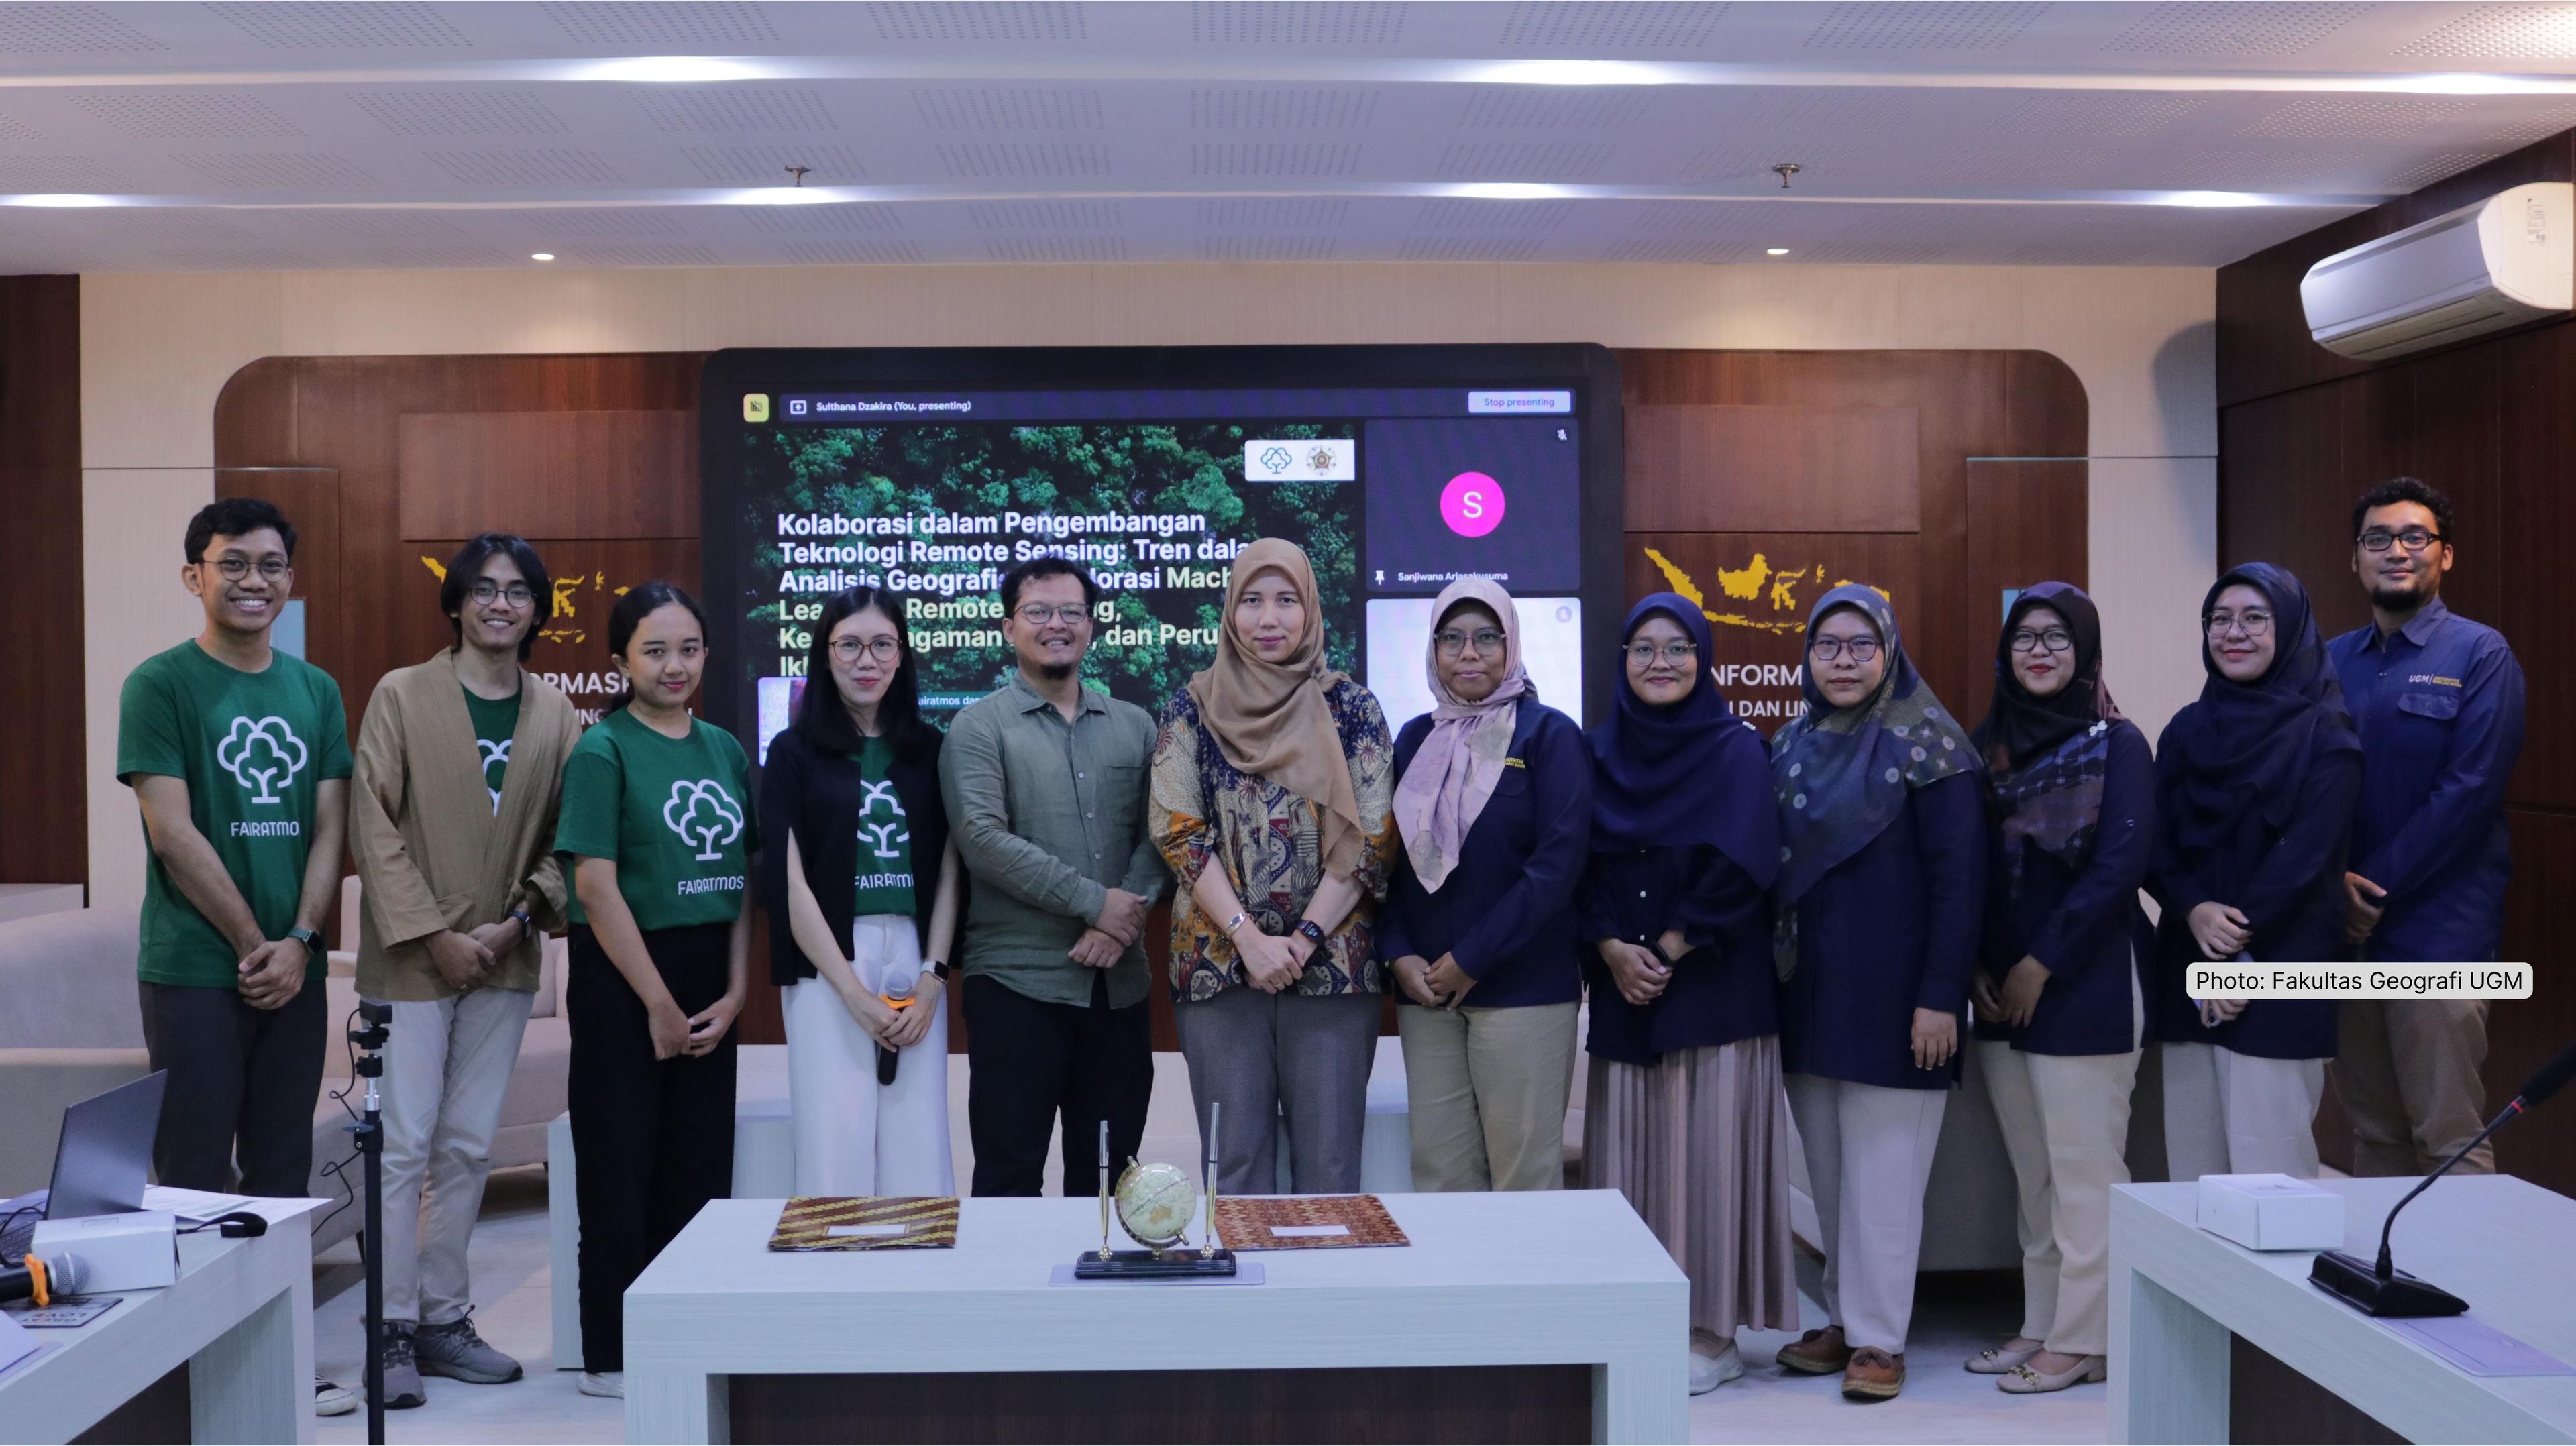 Fairatmos Collaborates with the Faculty of Geography at Gadjah Mada University (UGM) for Climate Technology Development through Academic Research